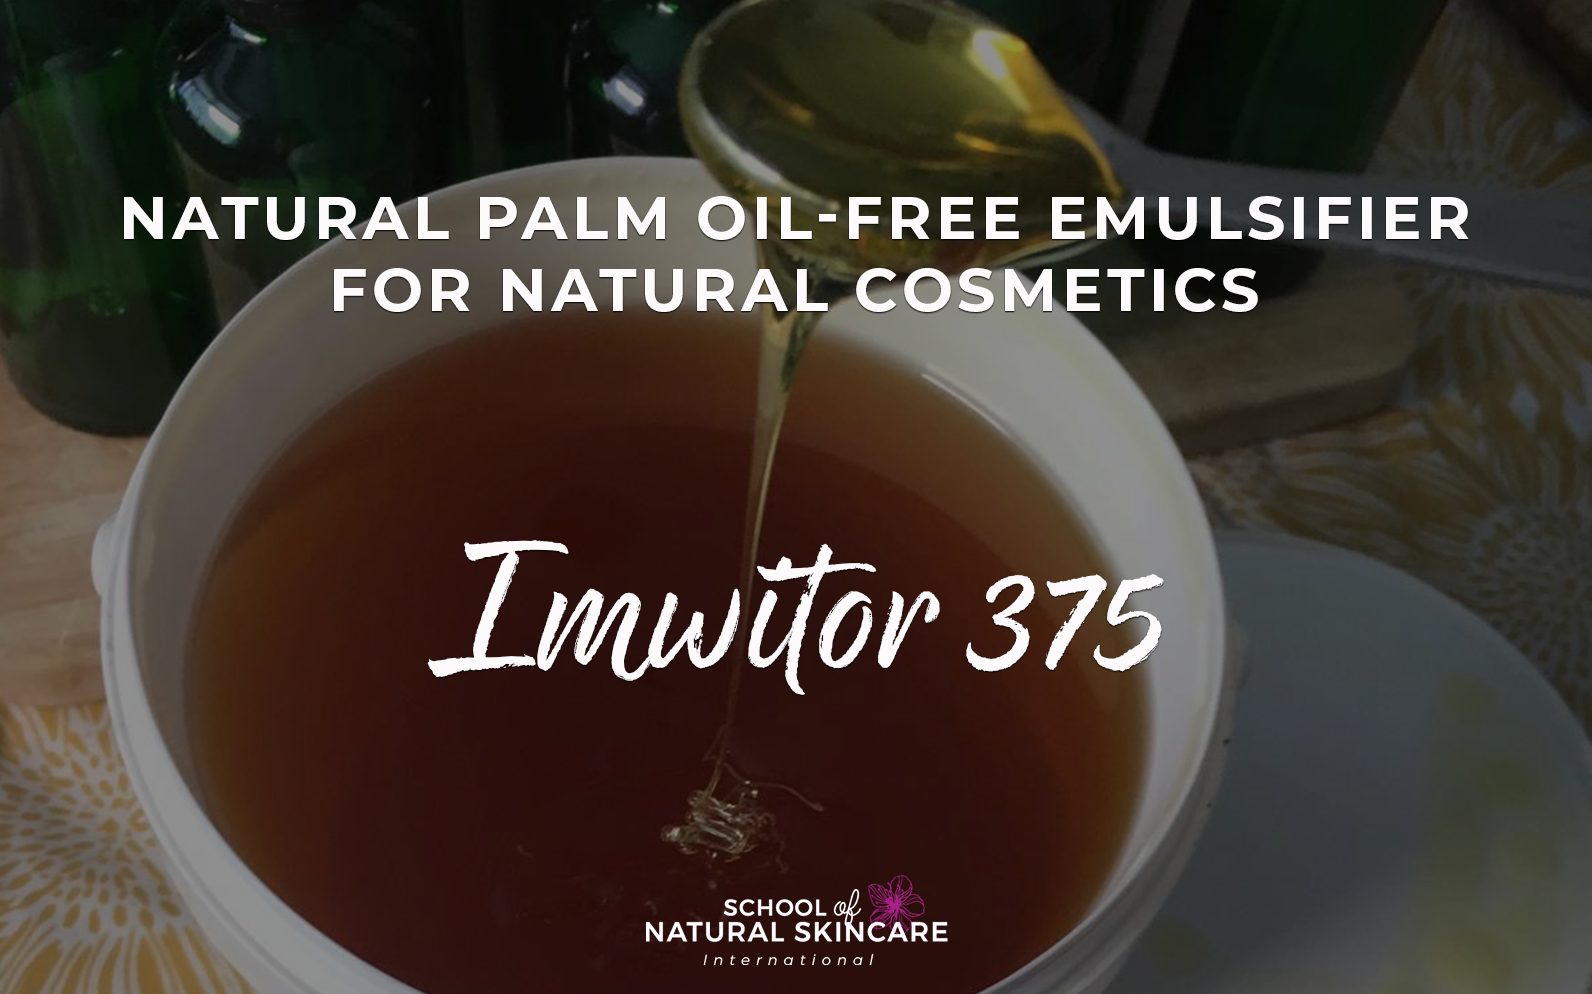 Natural Palm Oil-free Emulsifier for Natural Cosmetics: Imwitor 375 -  School of Natural Skincare